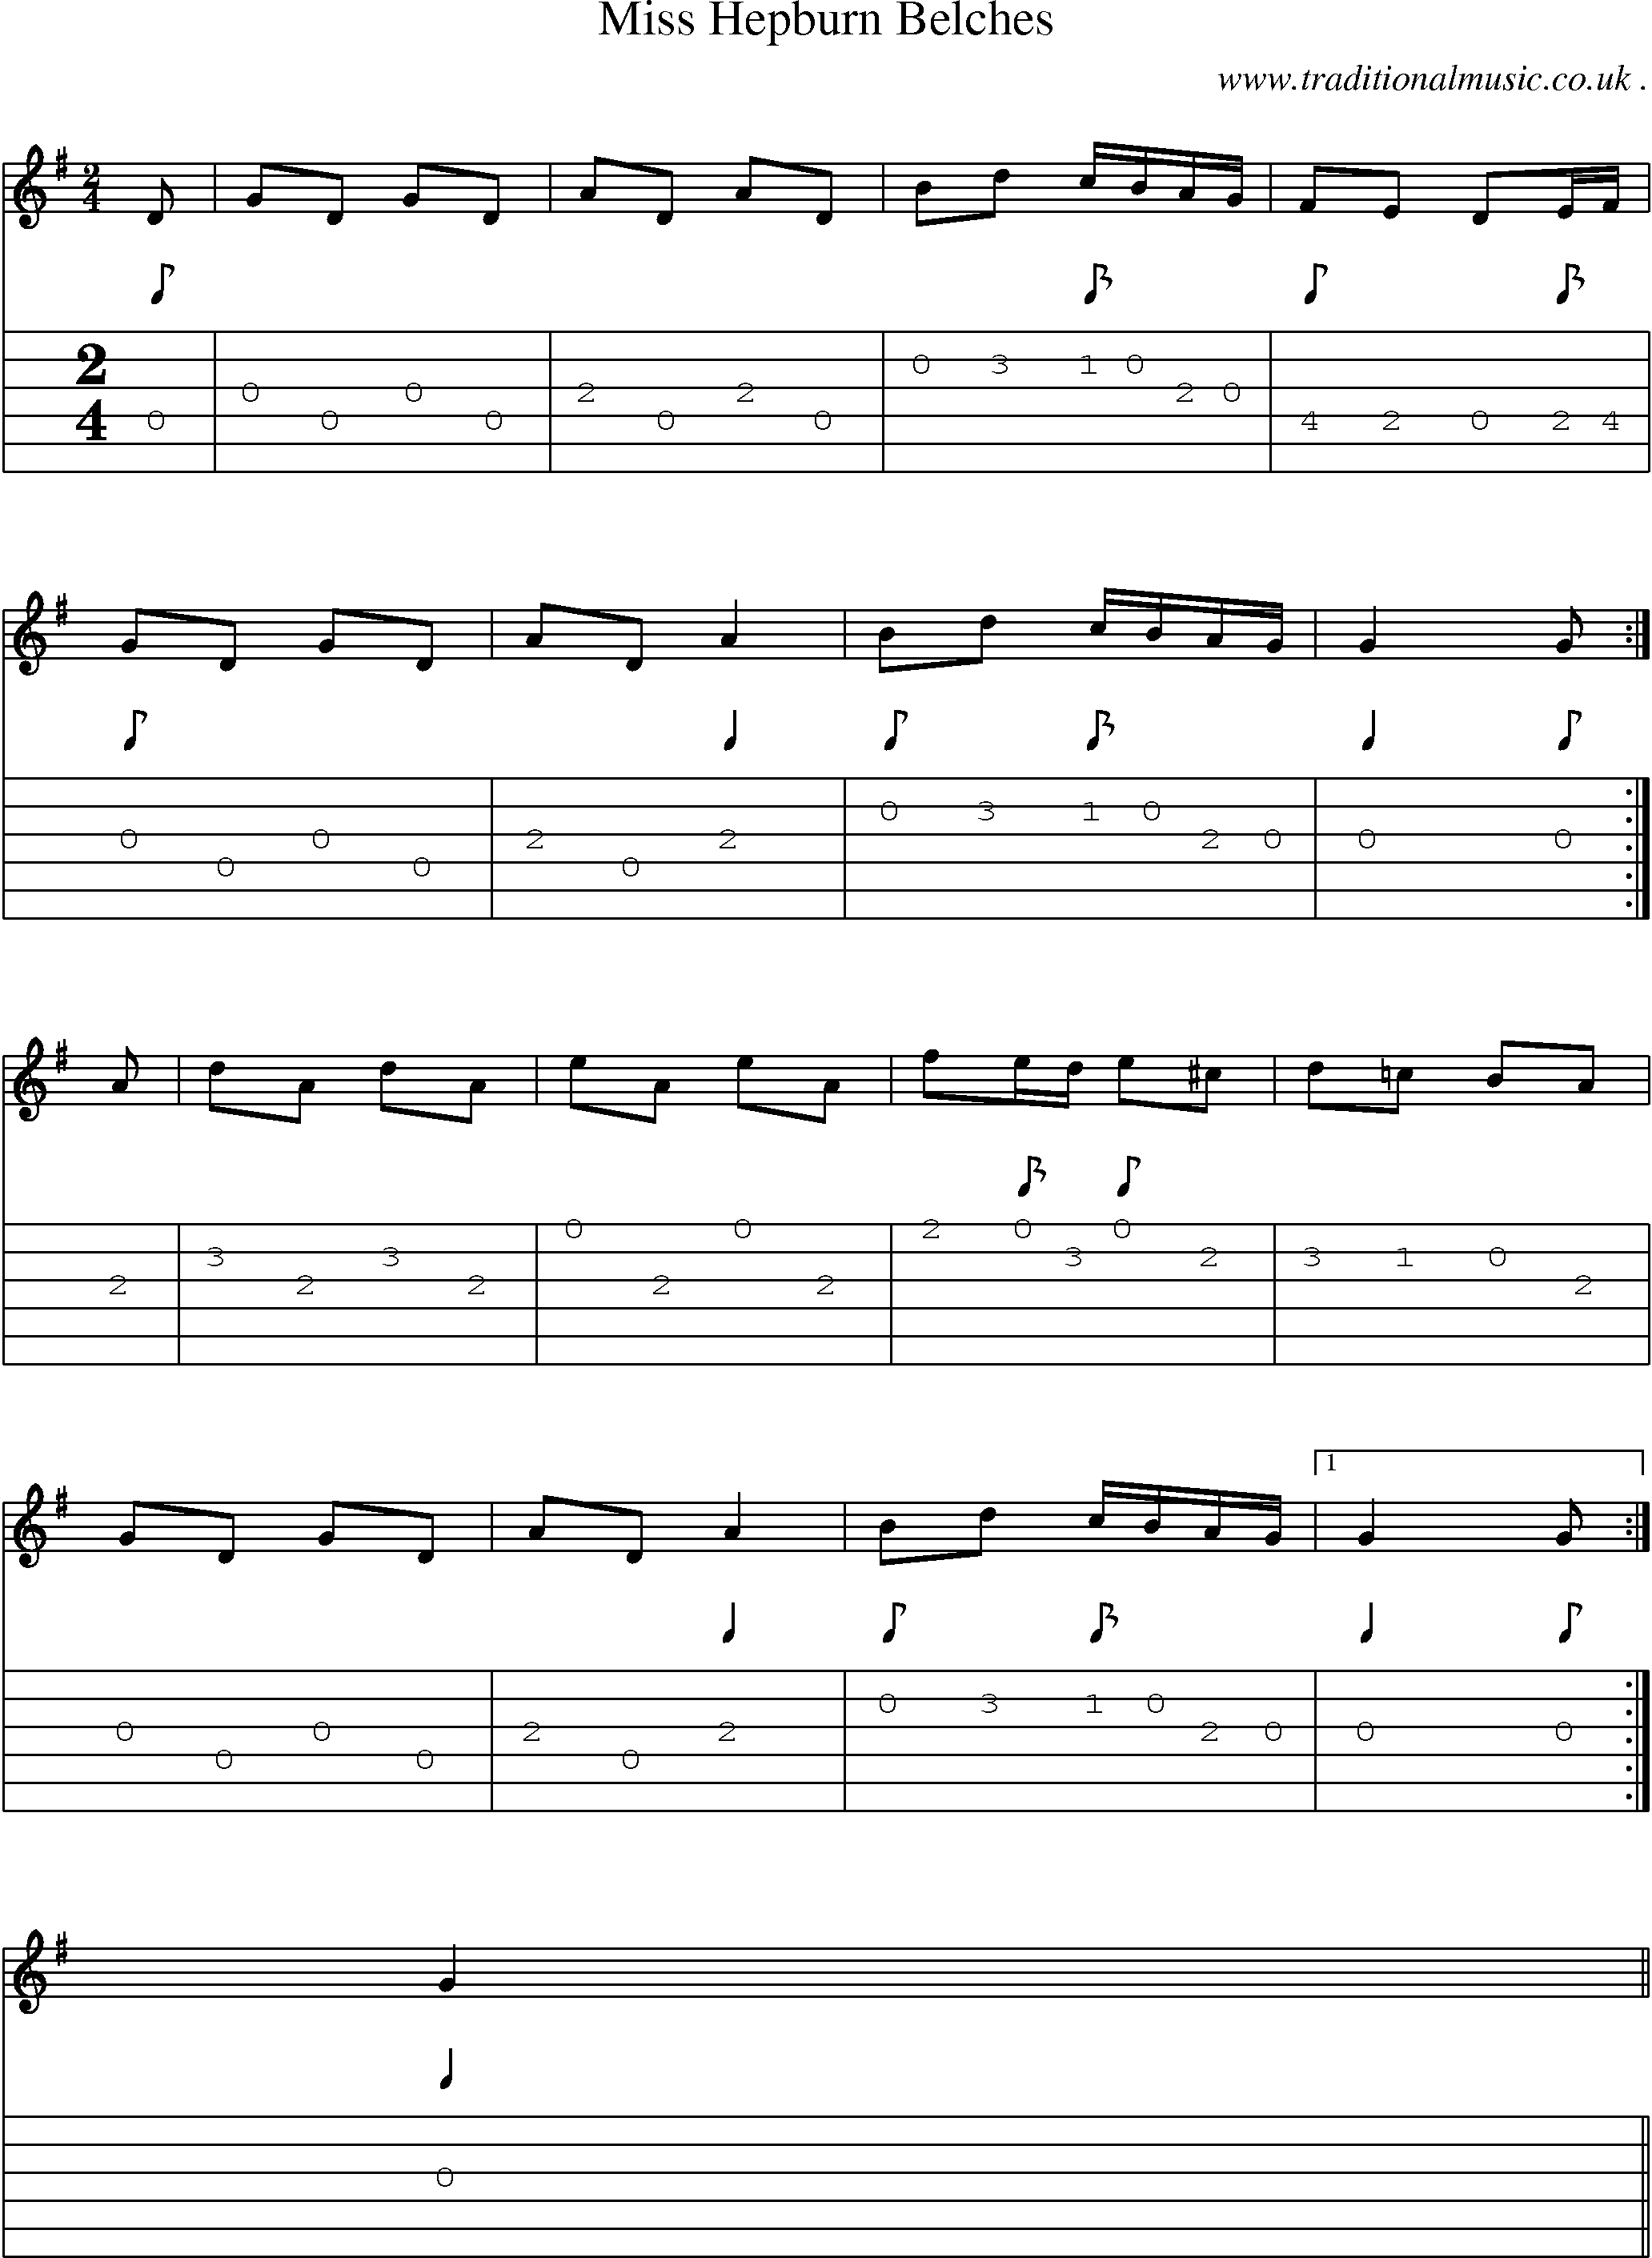 Sheet-music  score, Chords and Guitar Tabs for Miss Hepburn Belches